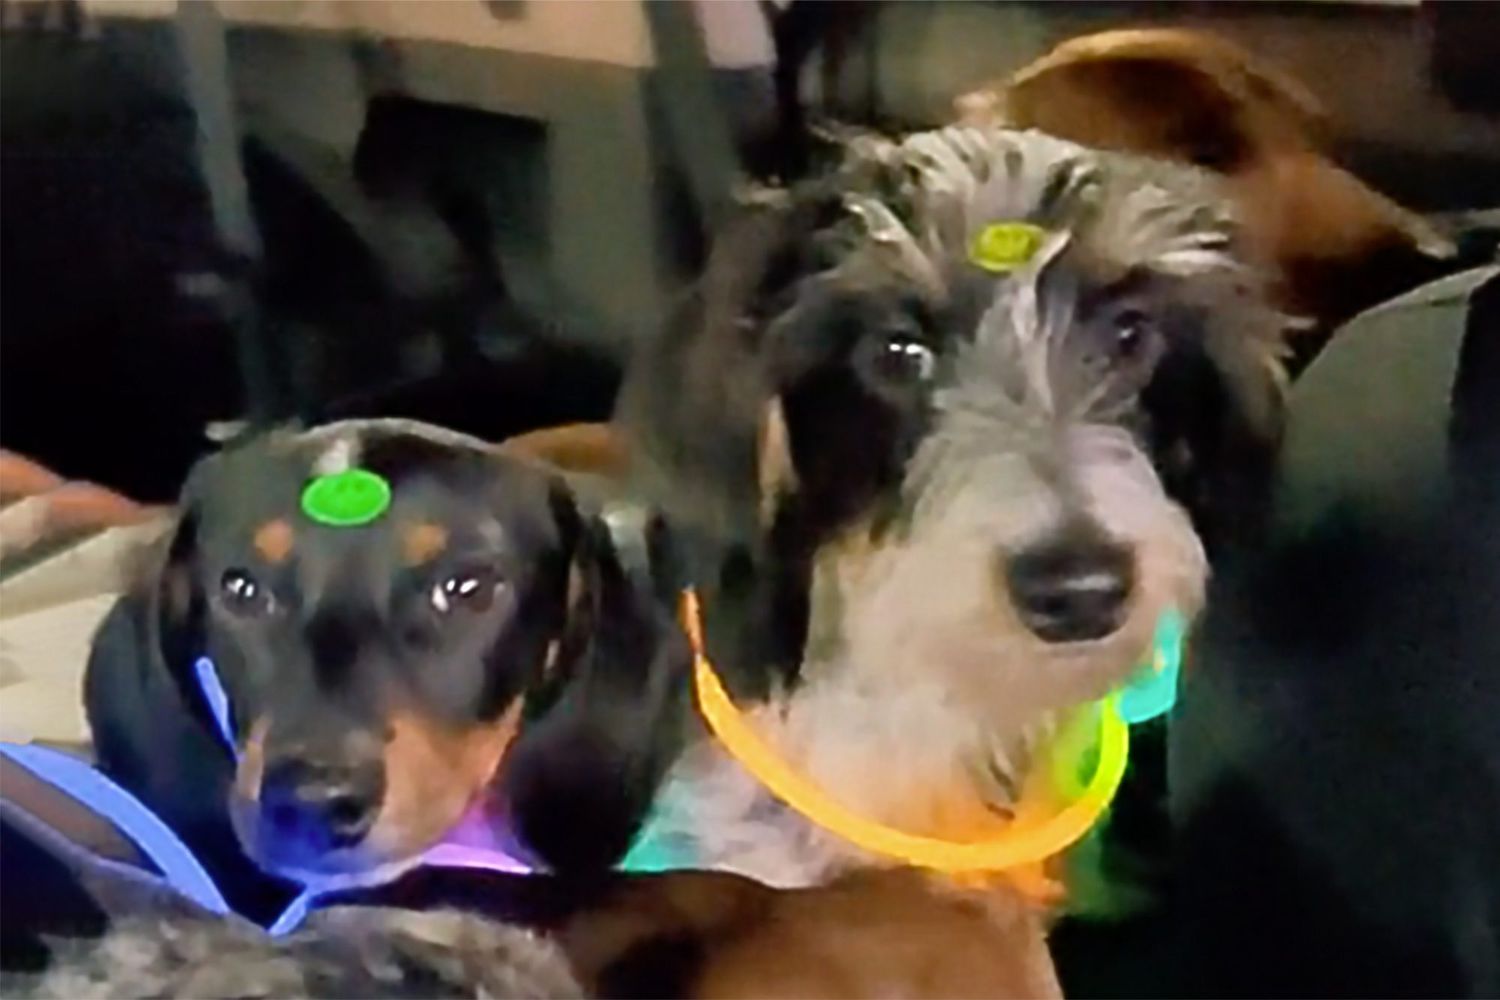 dachshunds in the car at a carwash at night with glow sticks